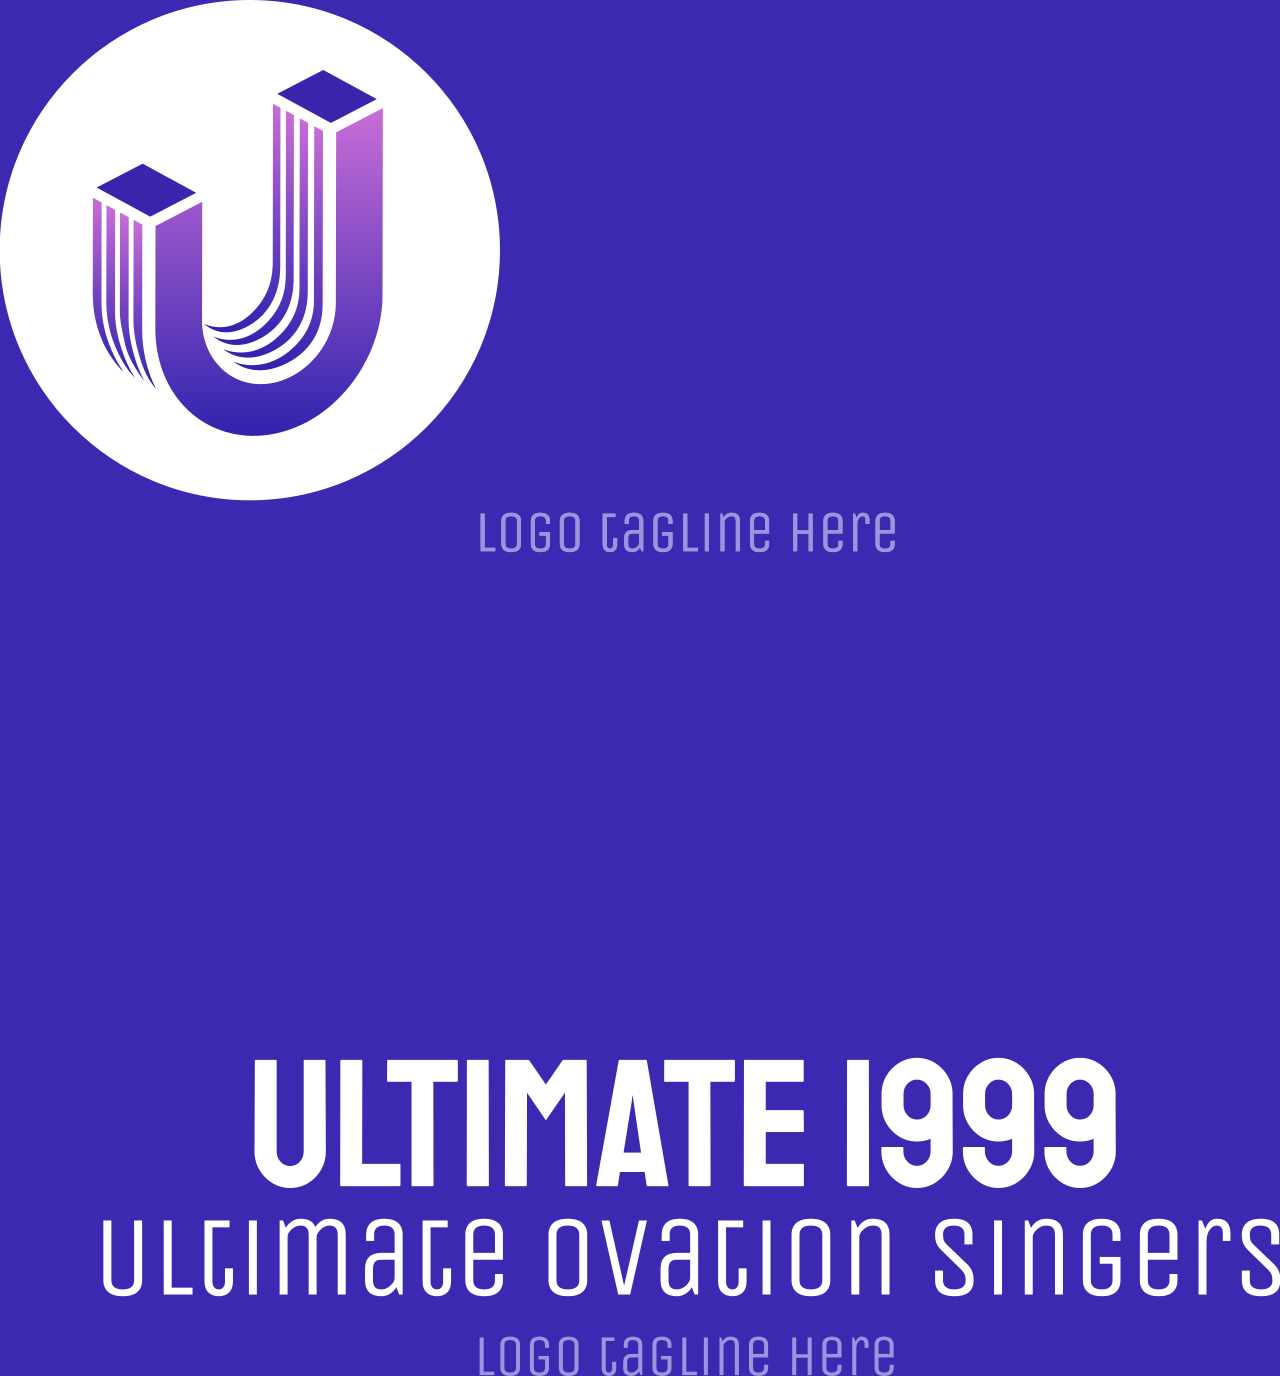 Ultimate 1999's web page